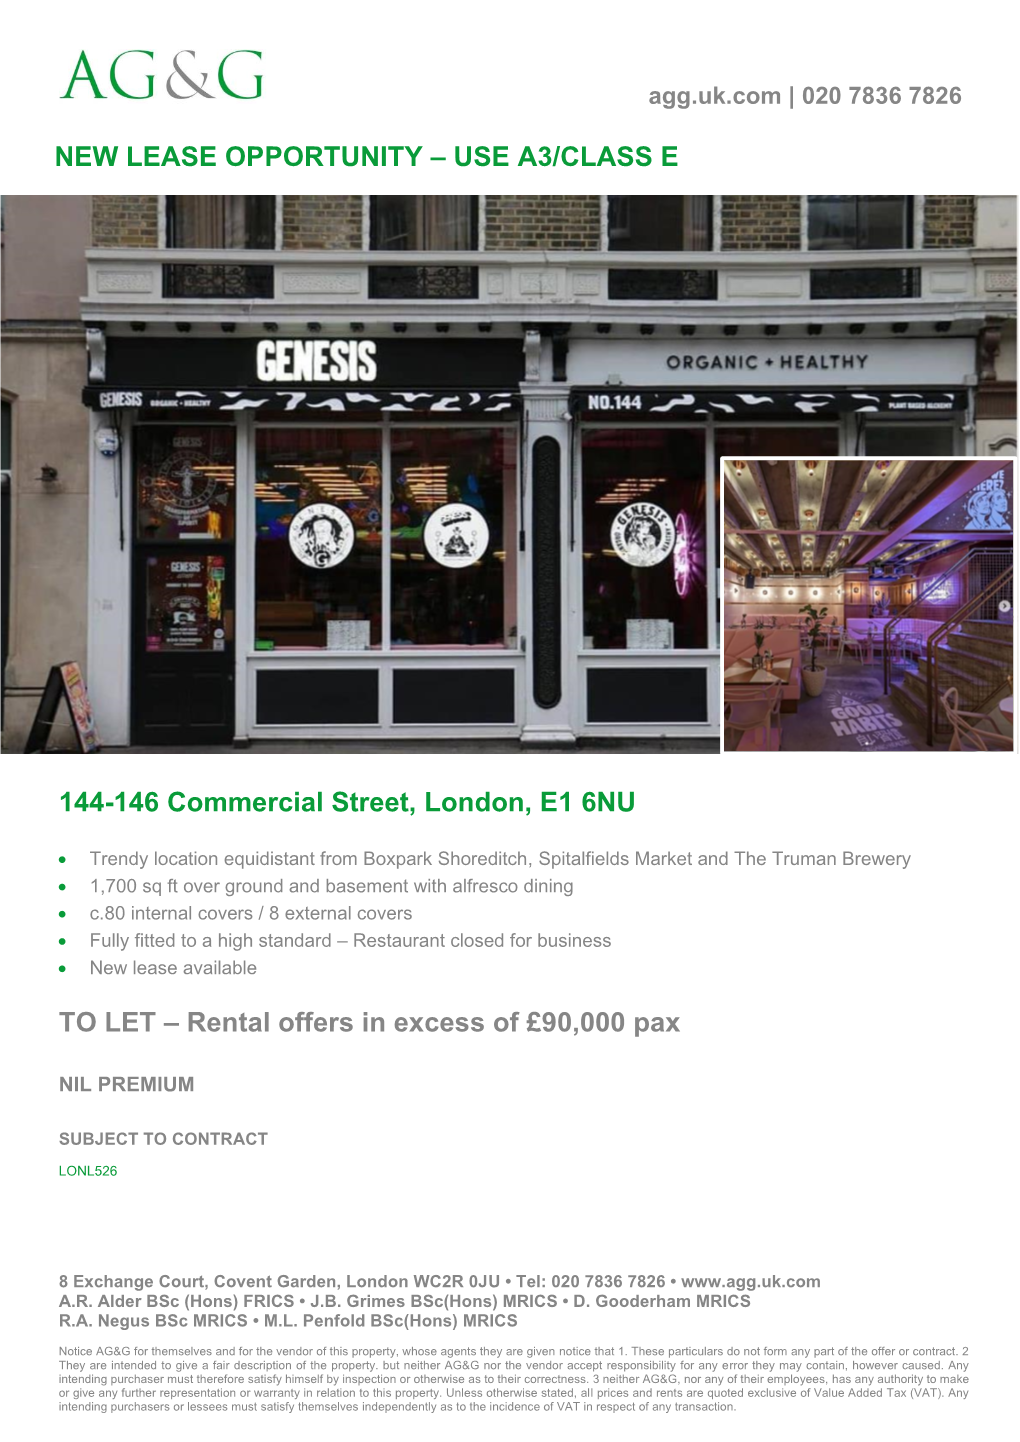 144-146 Commercial Street, London, E1 6NU TO